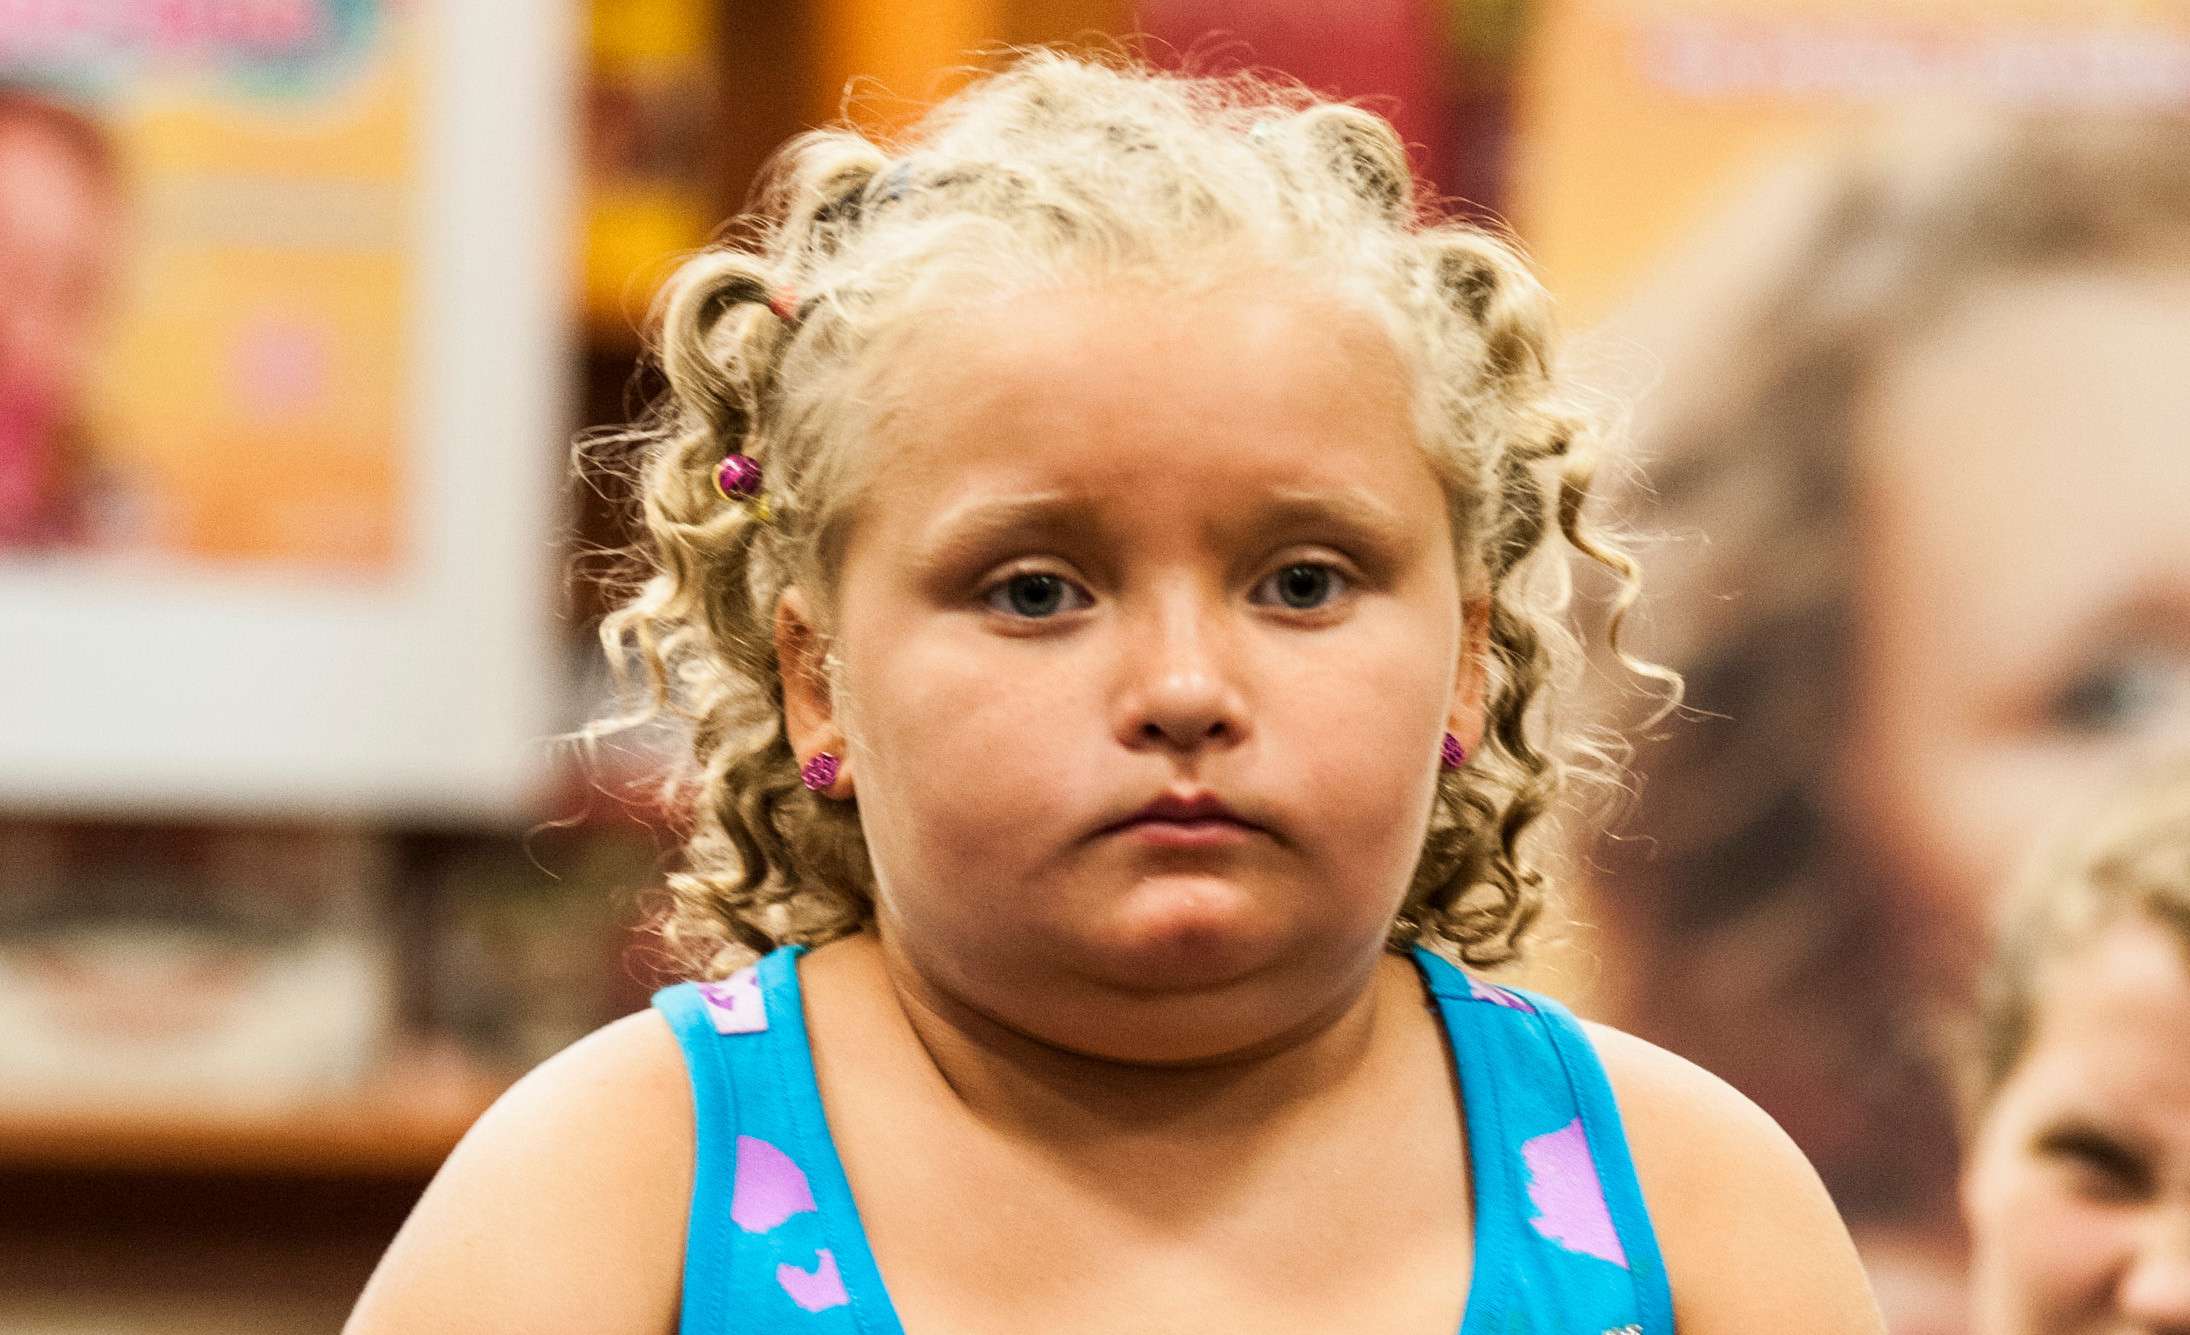 Taboola Ad Example 44060 - Honey Boo Boo Is So Skinny Now And Looks Like A Model – We Can’t Stop Staring (Photos)